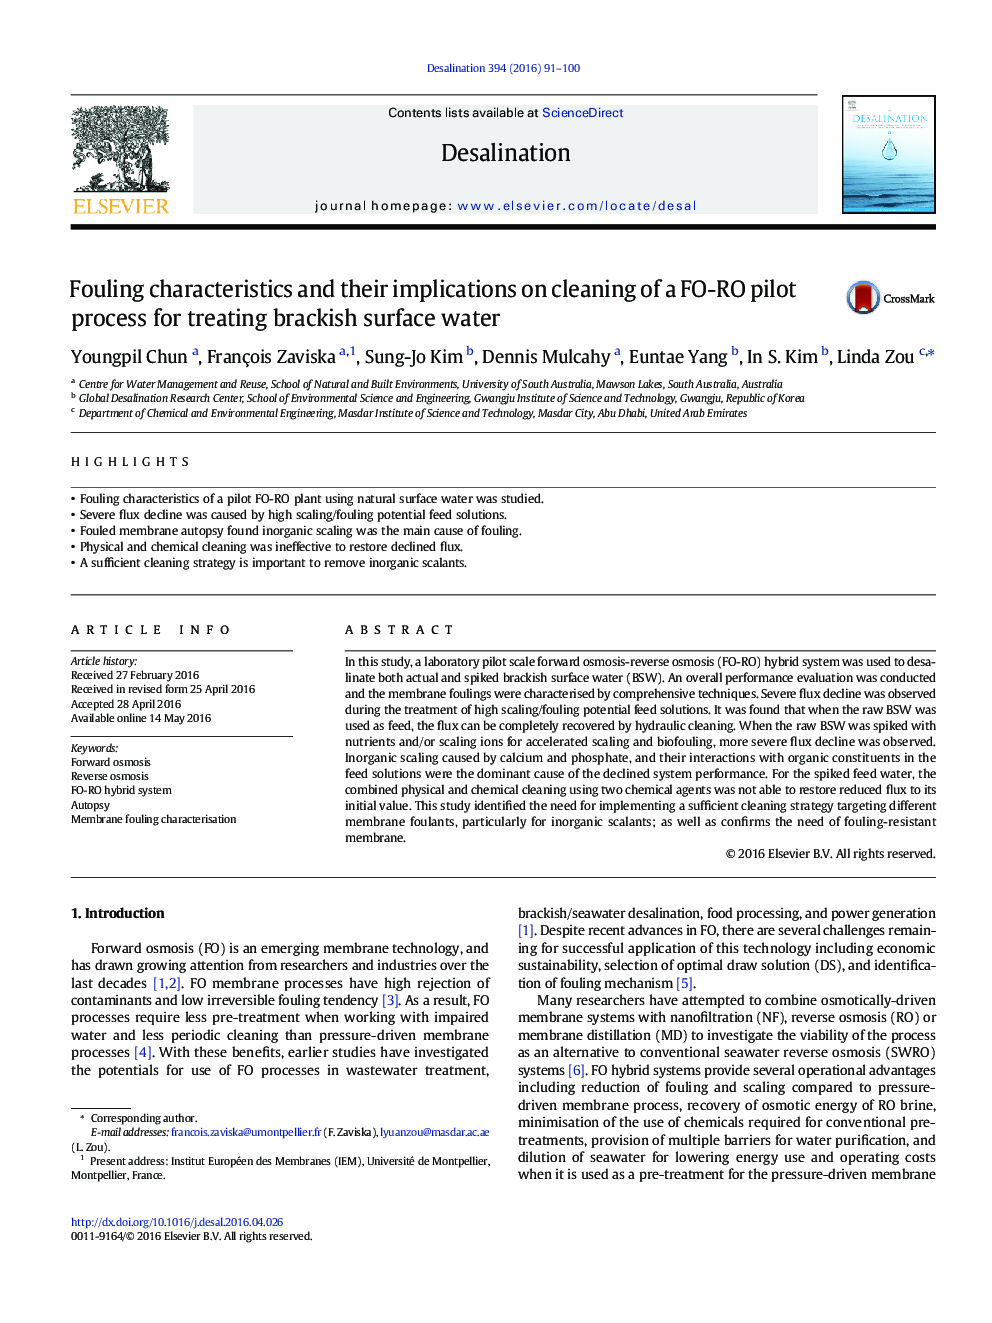 Fouling characteristics and their implications on cleaning of a FO-RO pilot process for treating brackish surface water